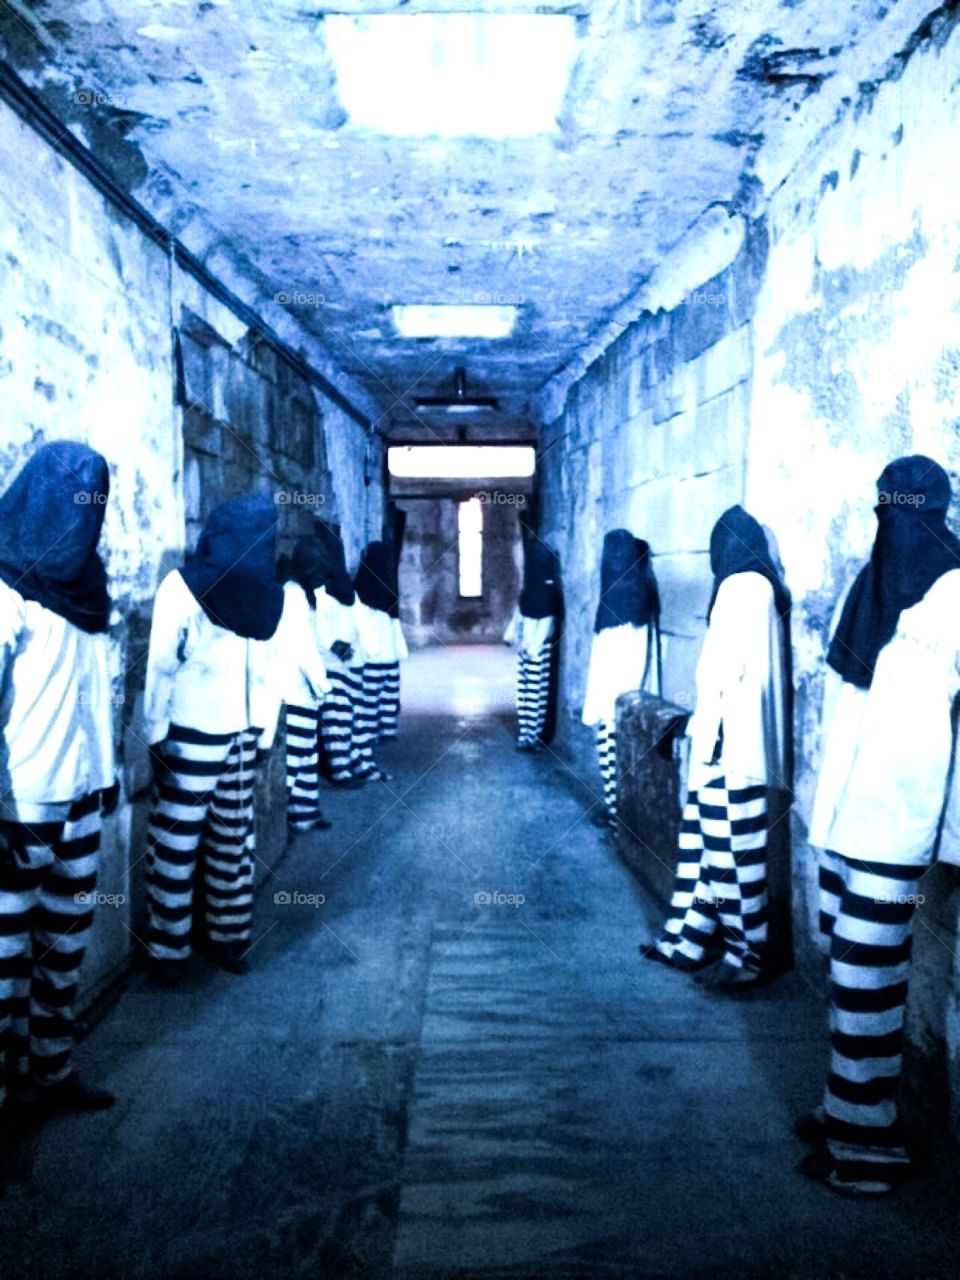 Death row inmates await execution in One of the United States’s most well known penitentiaries. The Eastern State Penitentiary in Philadelphia, PA is allegedly one of the most active haunted prison locations documented. 